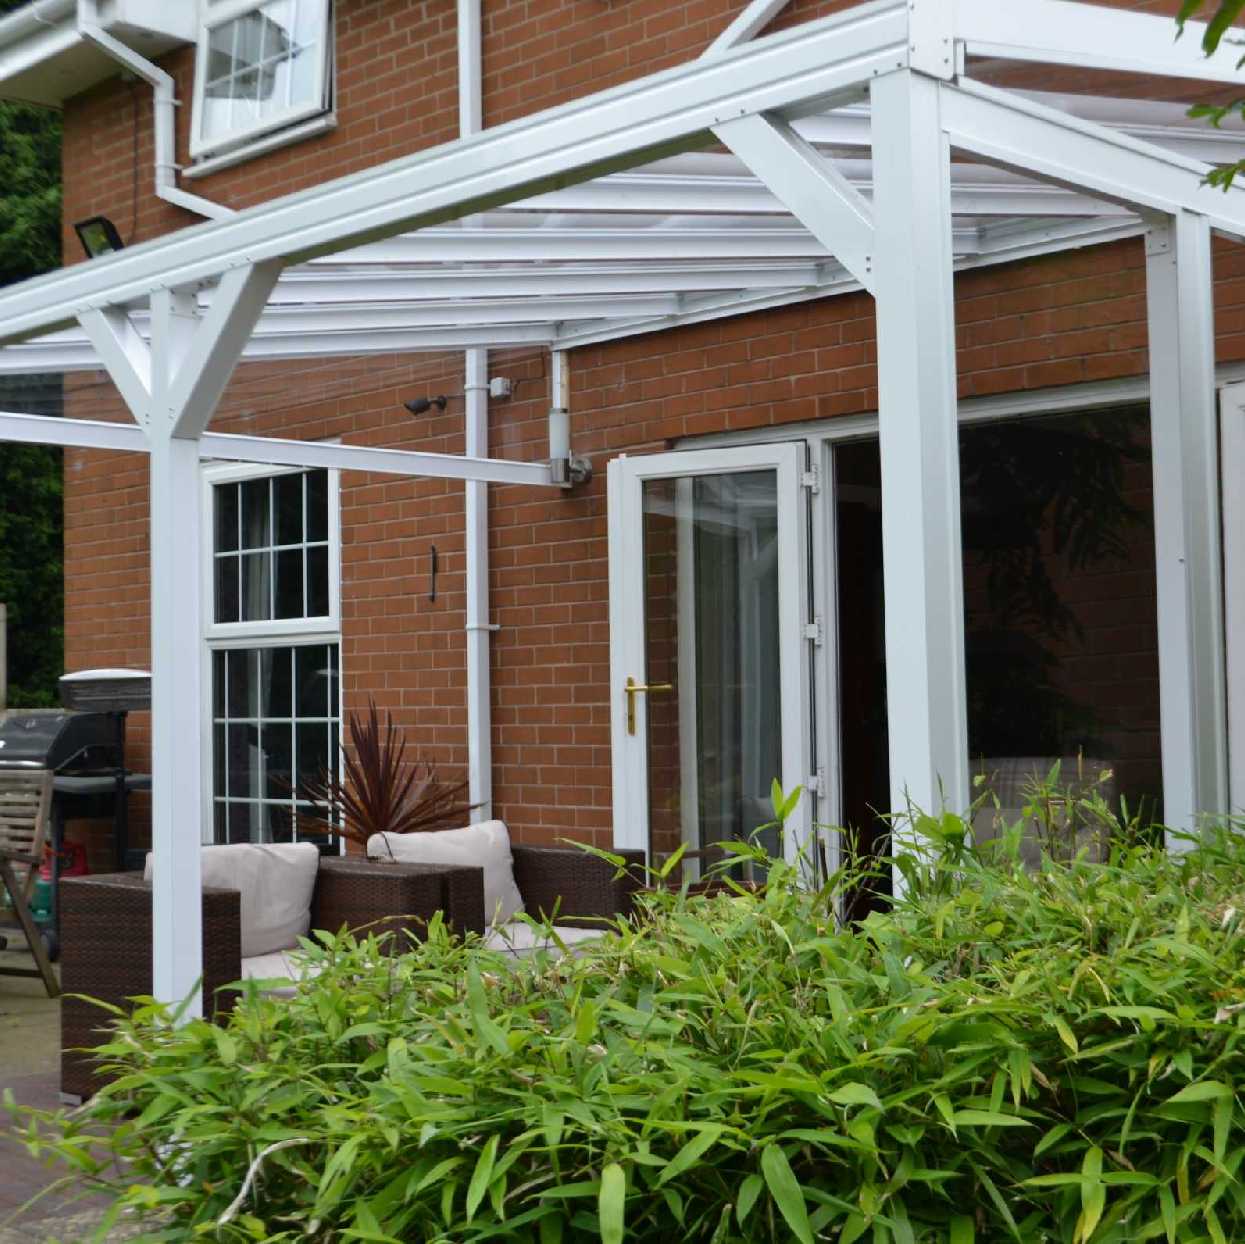 Omega Smart Lean-To Canopy, White with 6mm Glass Clear Plate Polycarbonate Glazing - 3.5m (W) x 1.5m (P), (3) Supporting Posts from Omega Build